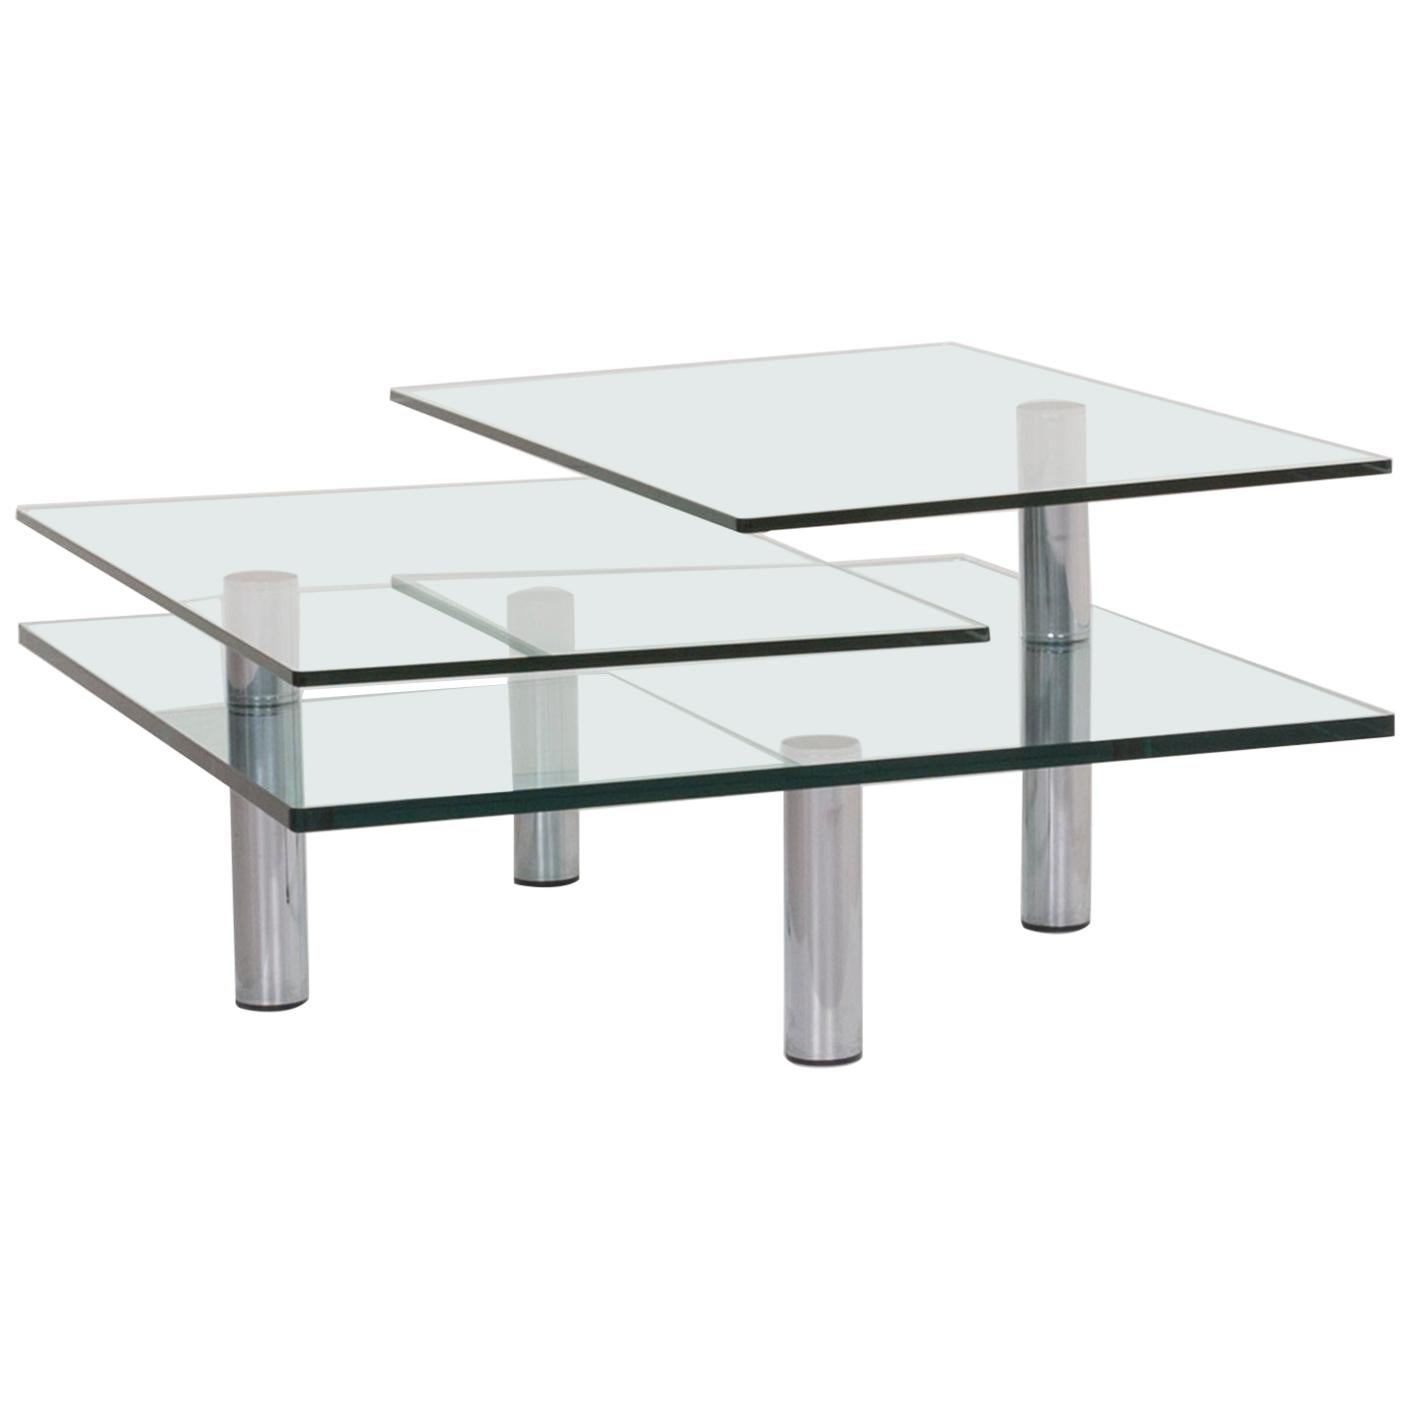 Draenert Imperial Glass Coffee Table Silver Table For Sale